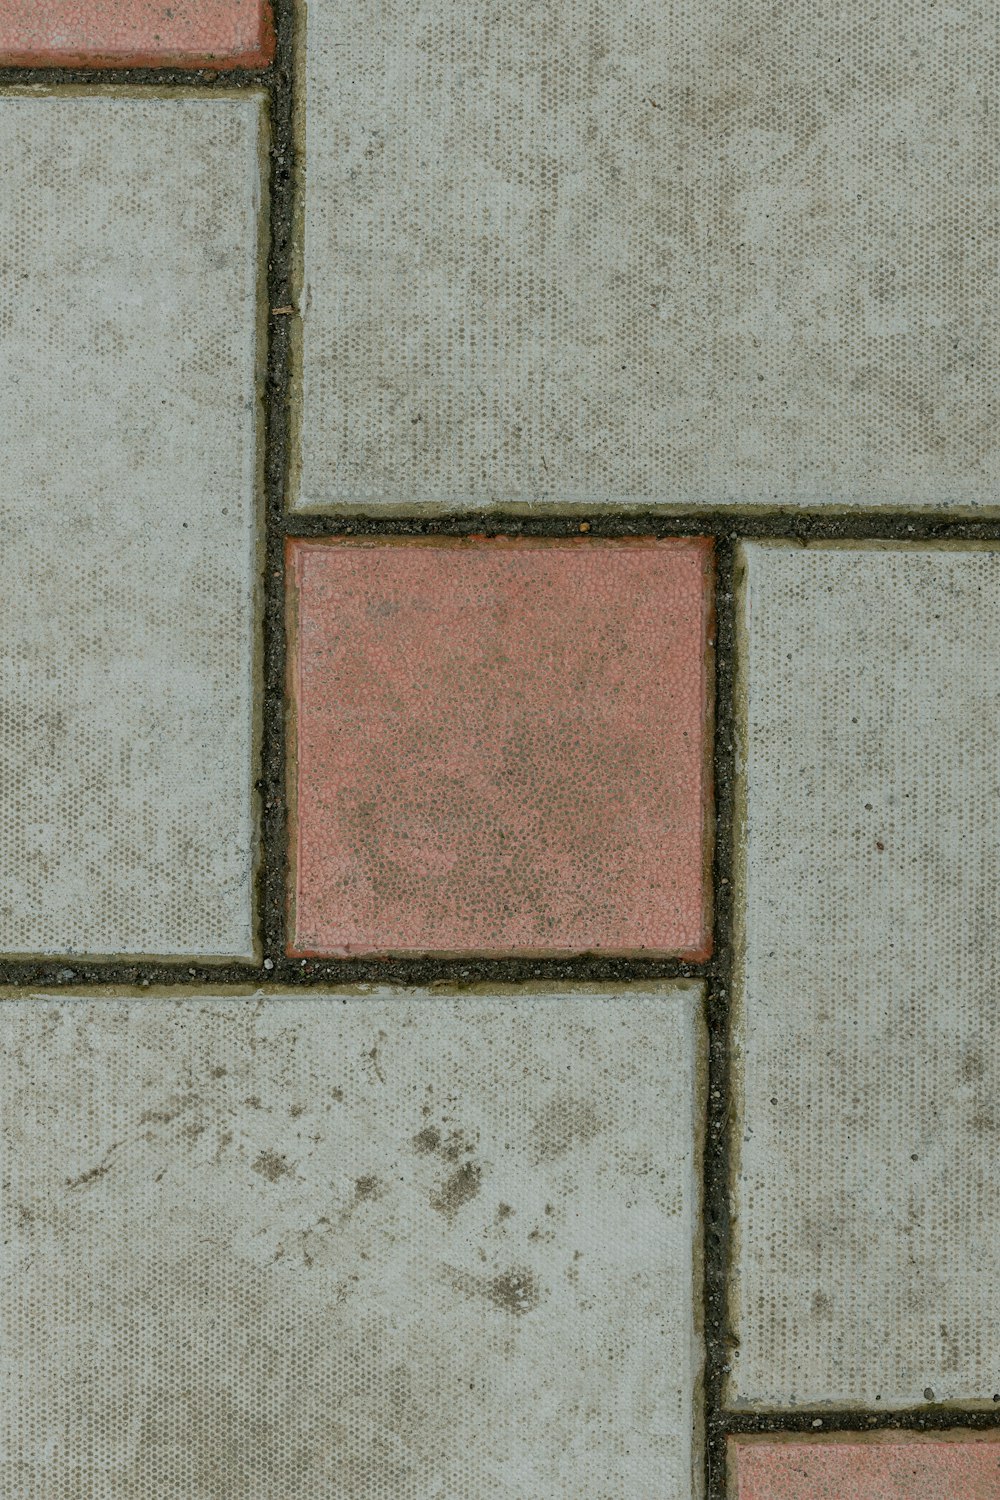 a close up of a red and white tiled floor